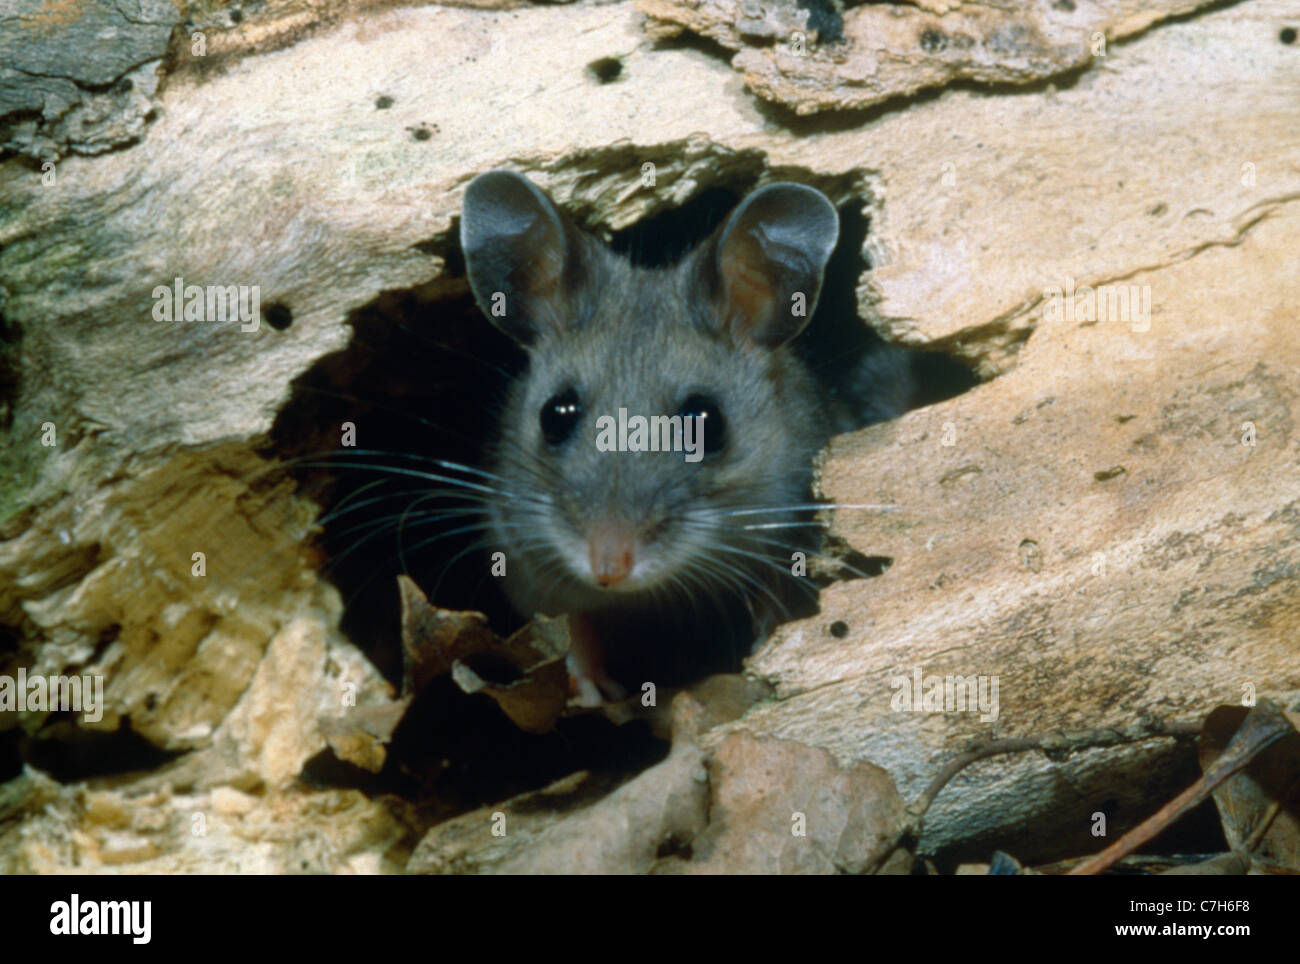 DEER MOUSE (PEROMYSCUS MANICULATUS) IN NEST HOLE Stock Photo